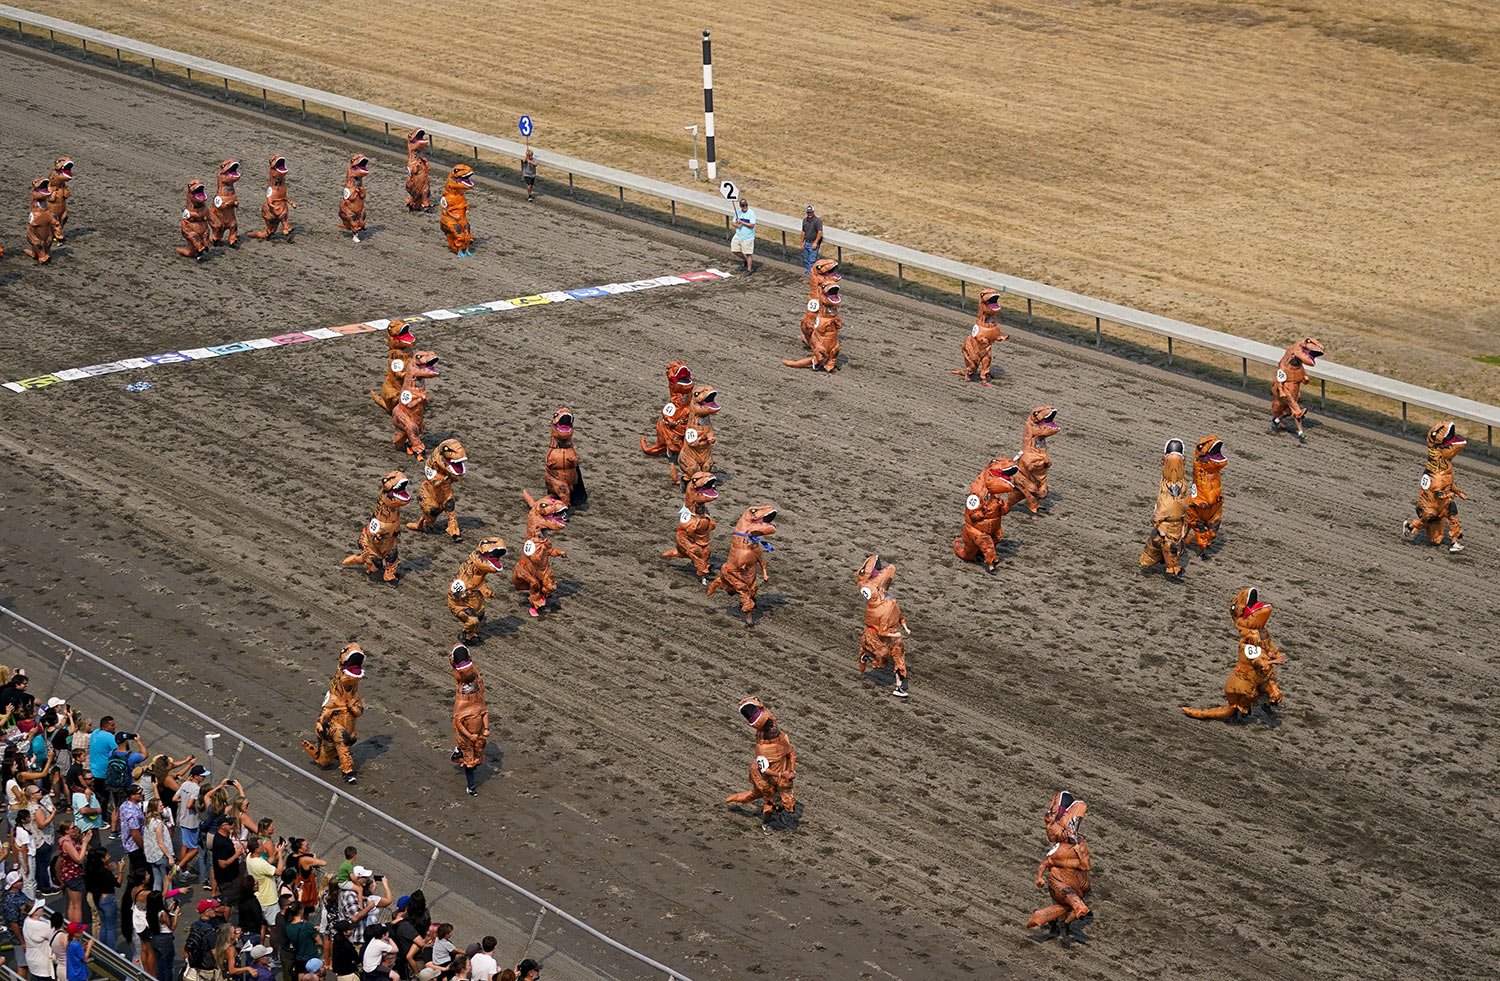  Participants in T-Rex costumes race in the first set of heats during the "T-Rex World Championship Races" at Emerald Downs, in Auburn, Wash., Aug. 20, 2023. (AP Photo/Lindsey Wasson) 